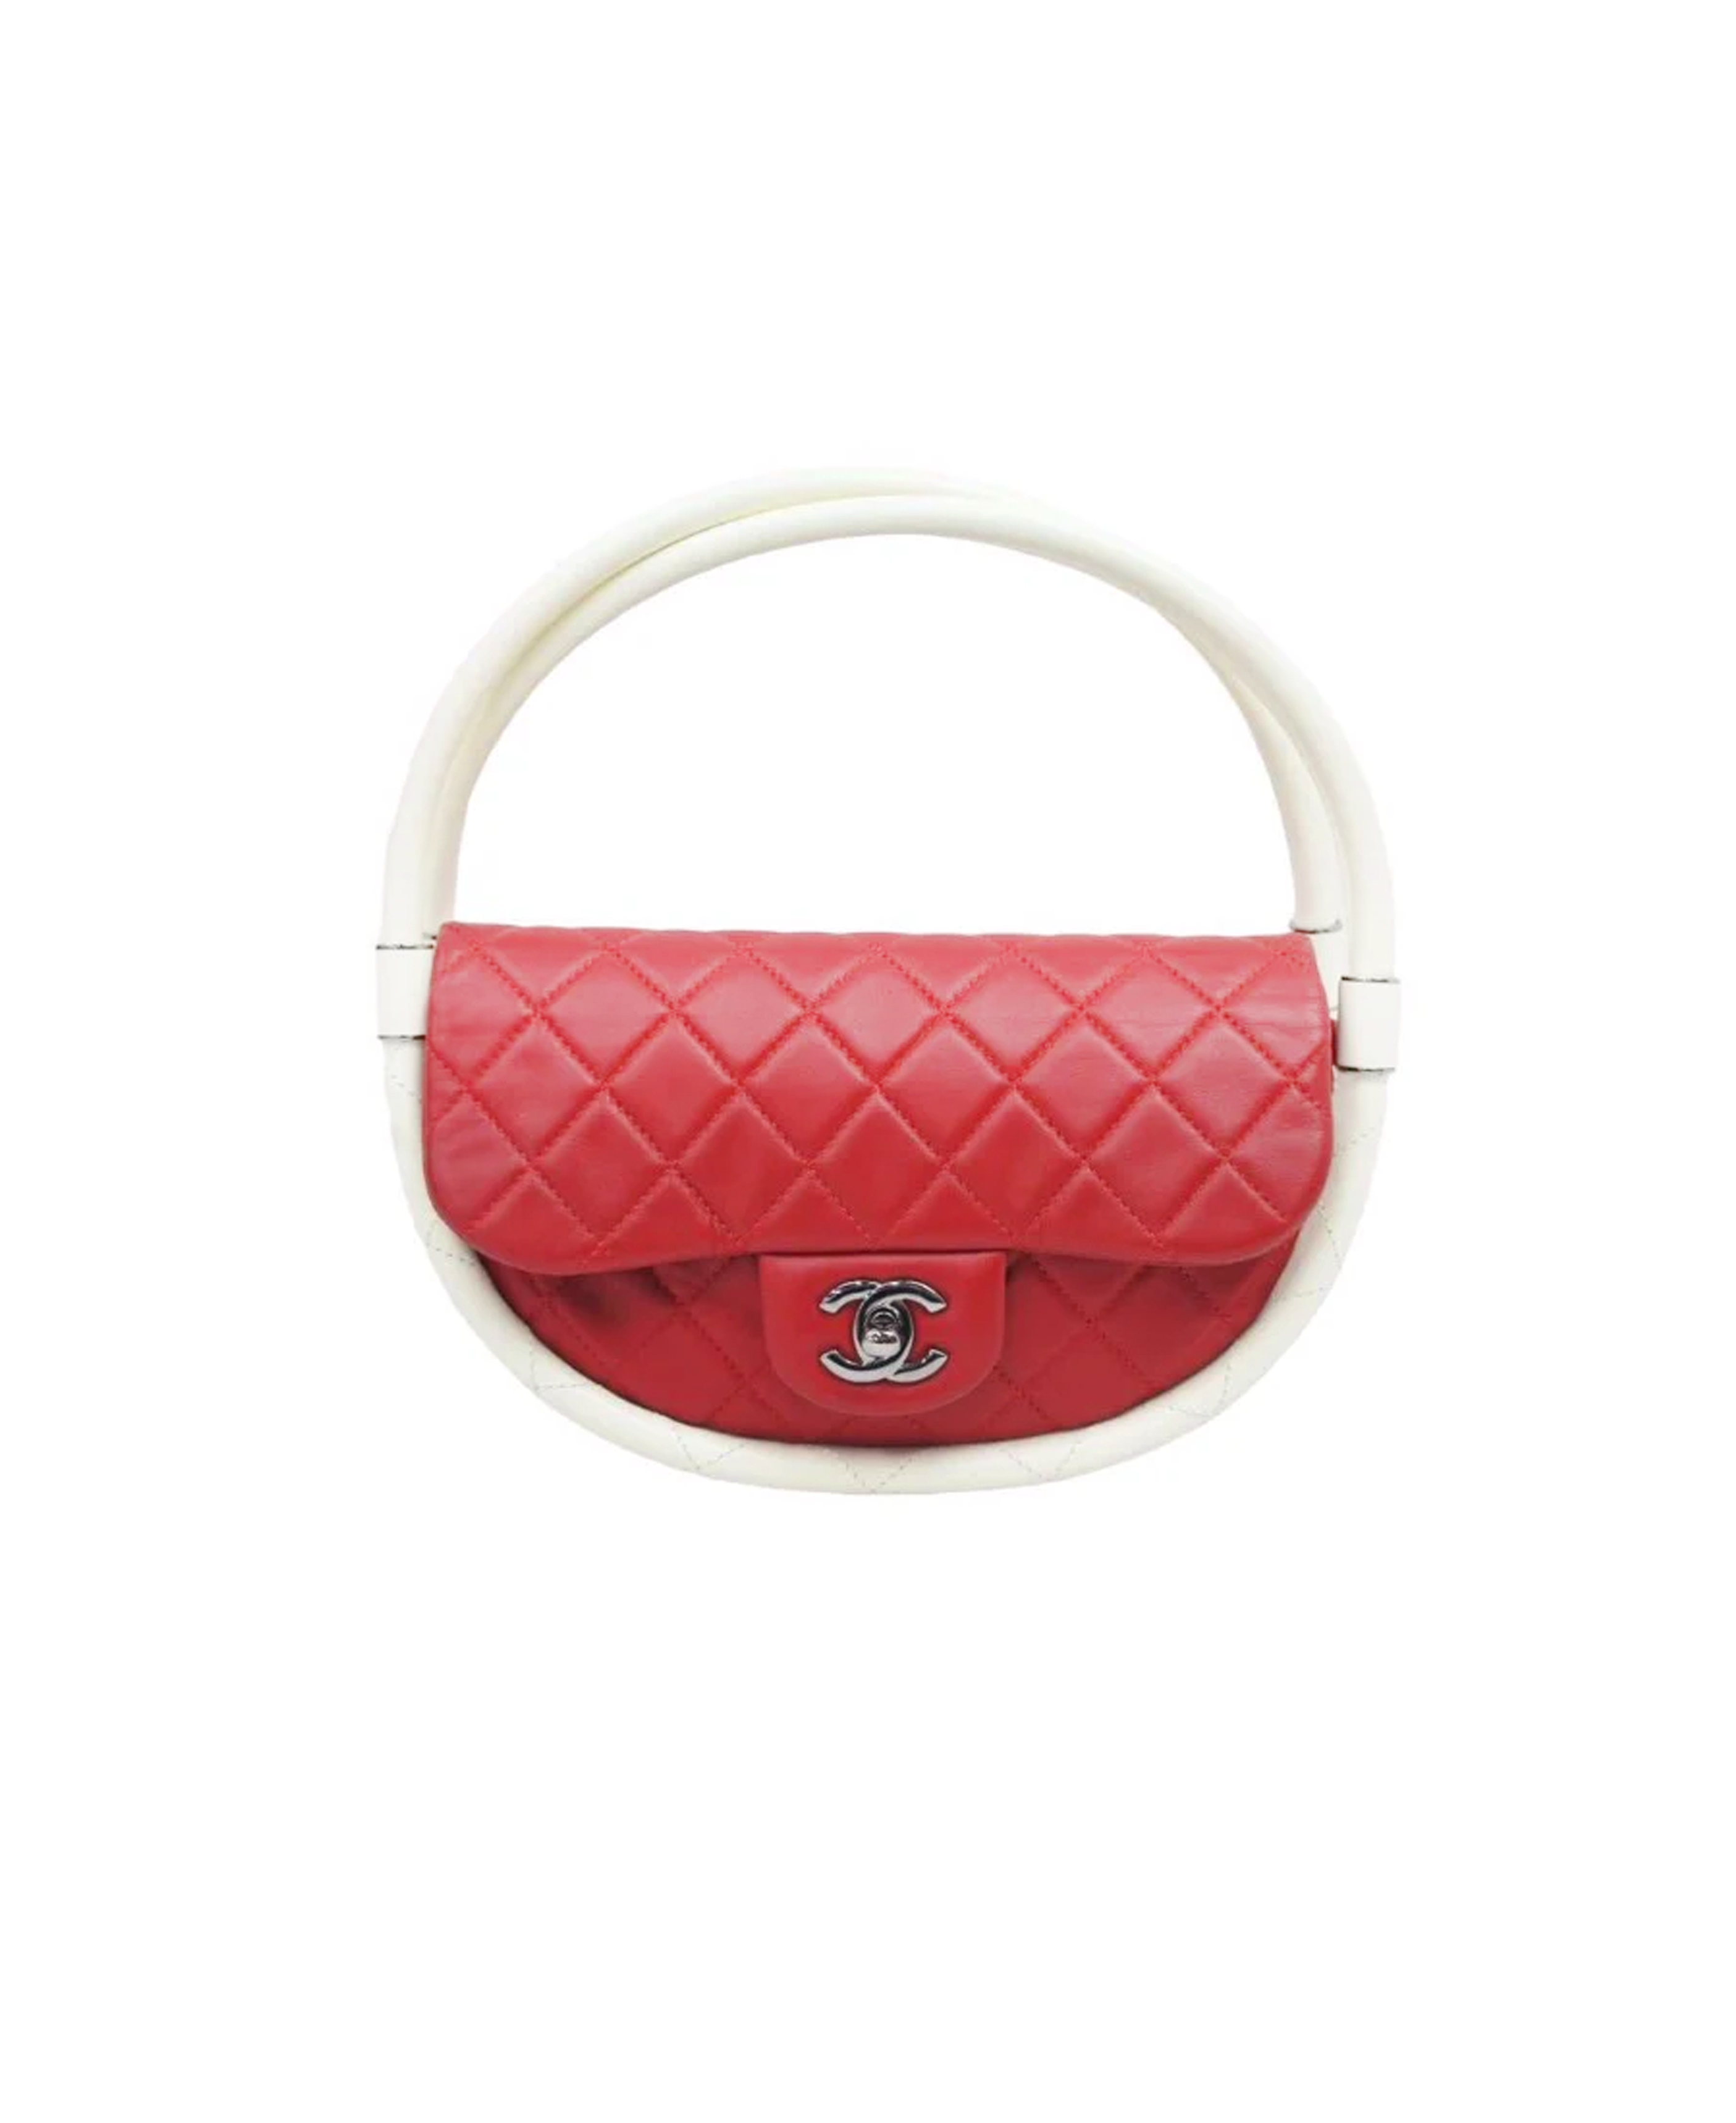 CHANEL 2013 CC HULA HOOP WITH RED QUILTED FLAP CARRYING BAG